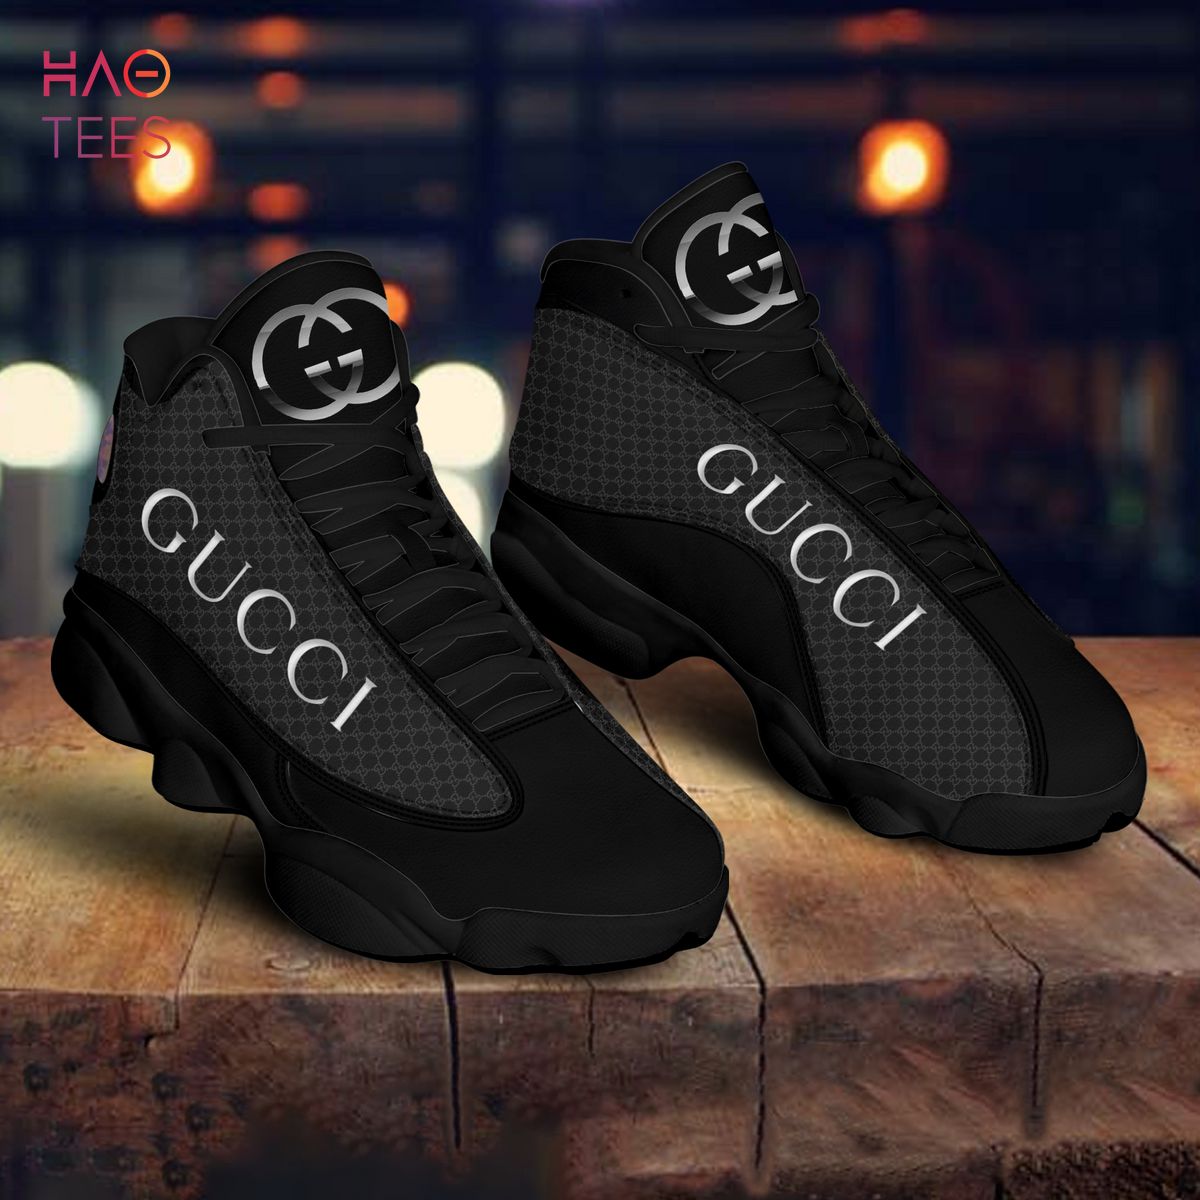 Luxury brand gucci air jordan 13 sneakers shoes gifts for men women in 2023